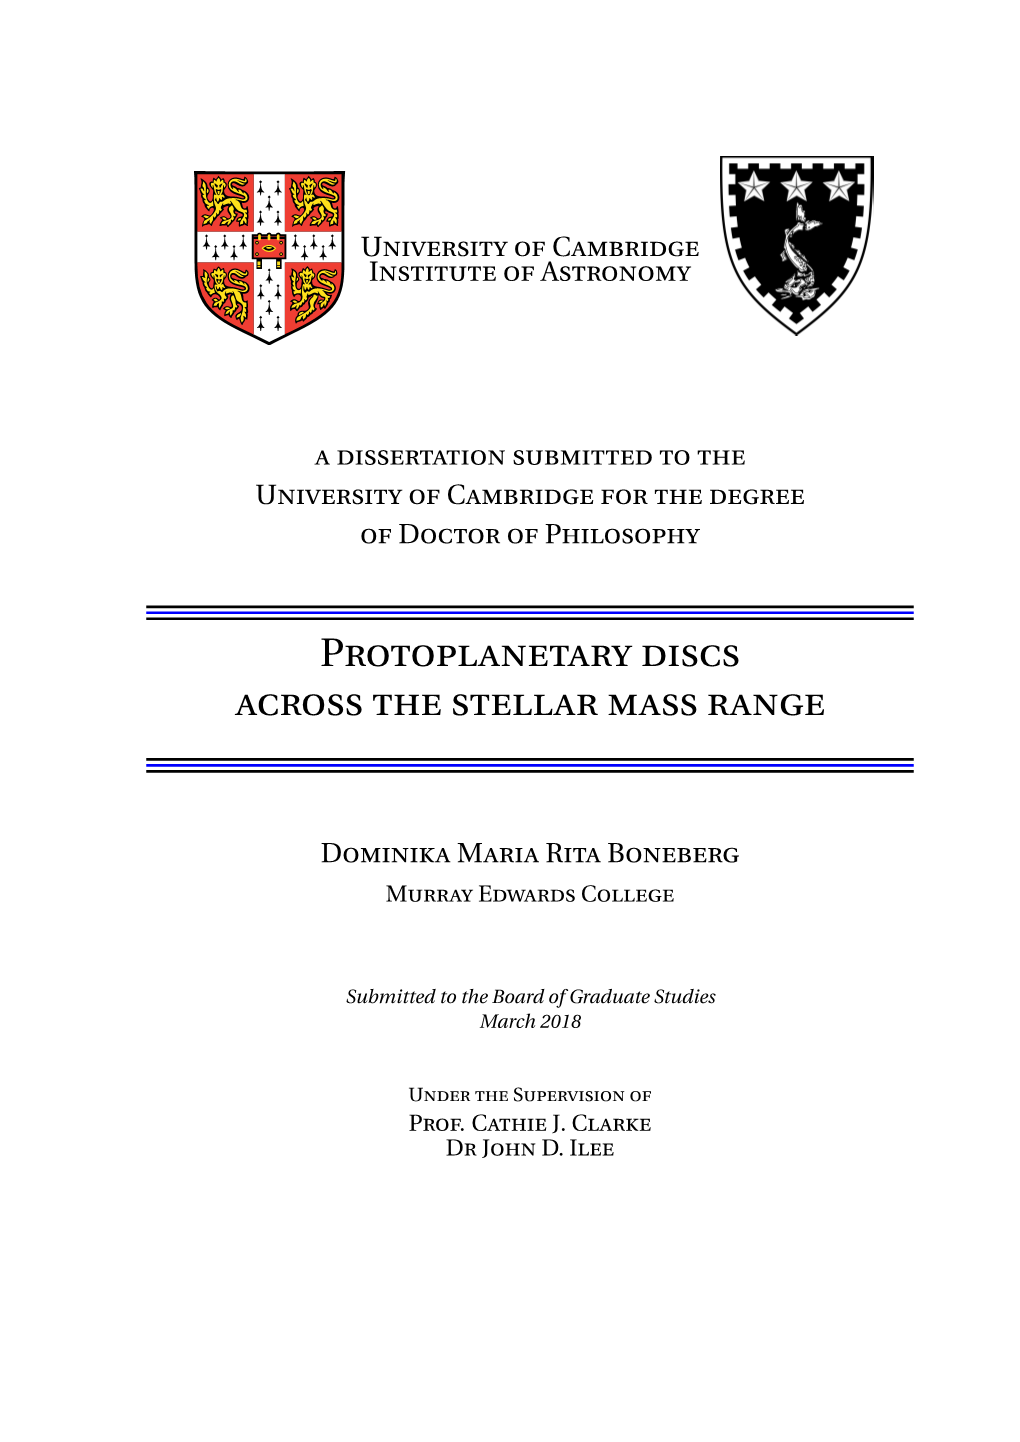 Thesis, I Discuss Two Studies Concerned with Modelling Protoplanetary Discs Around Stars from Diﬀerent Ends of the Stellar Mass Range